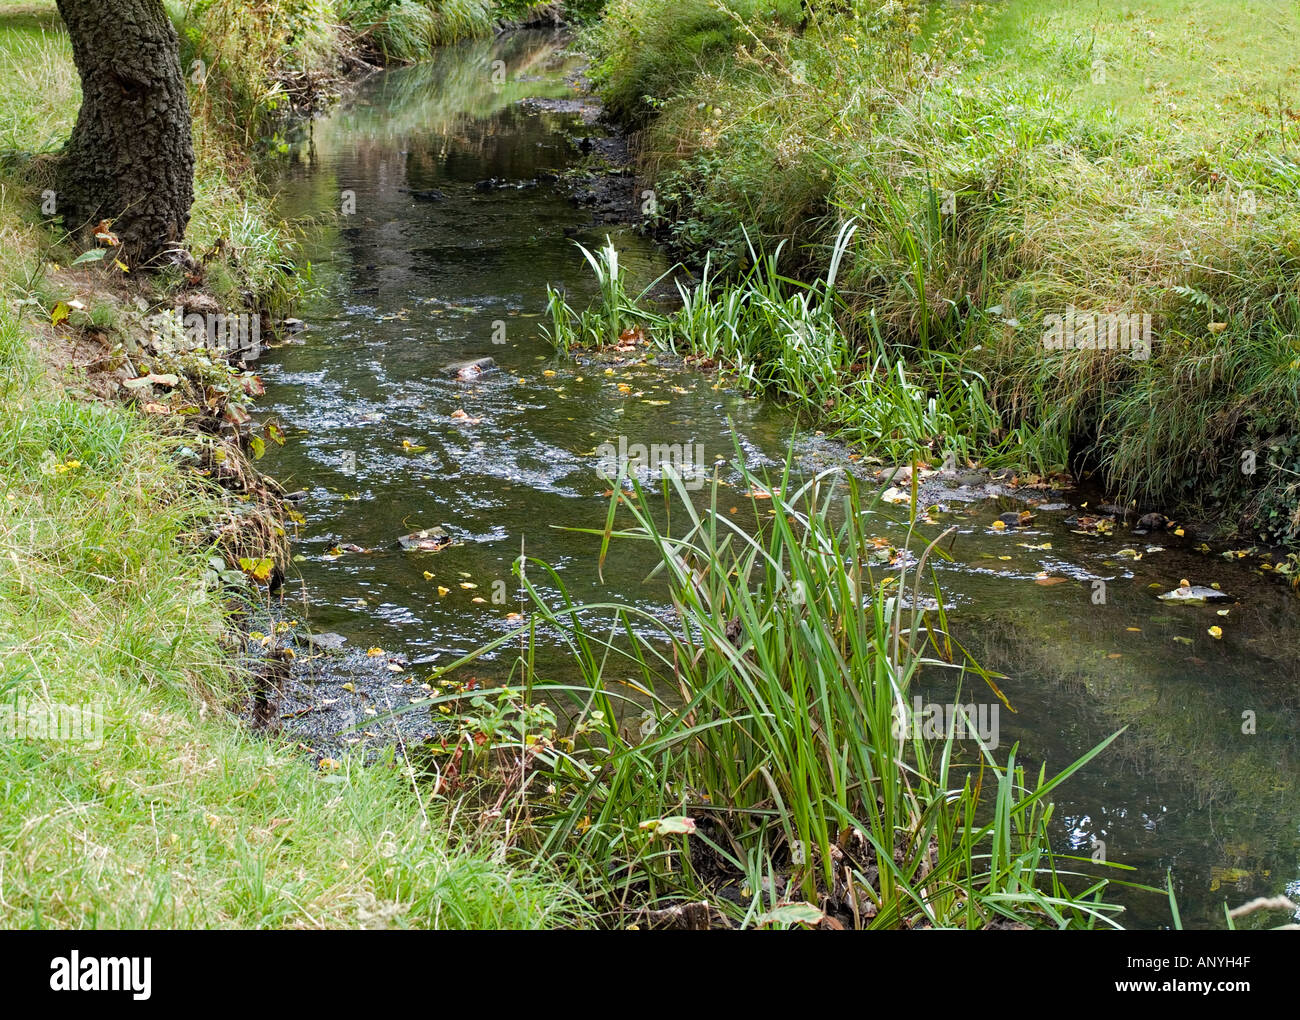 Country stream with grassy banks and water plants riverside walk UK Stock Photo